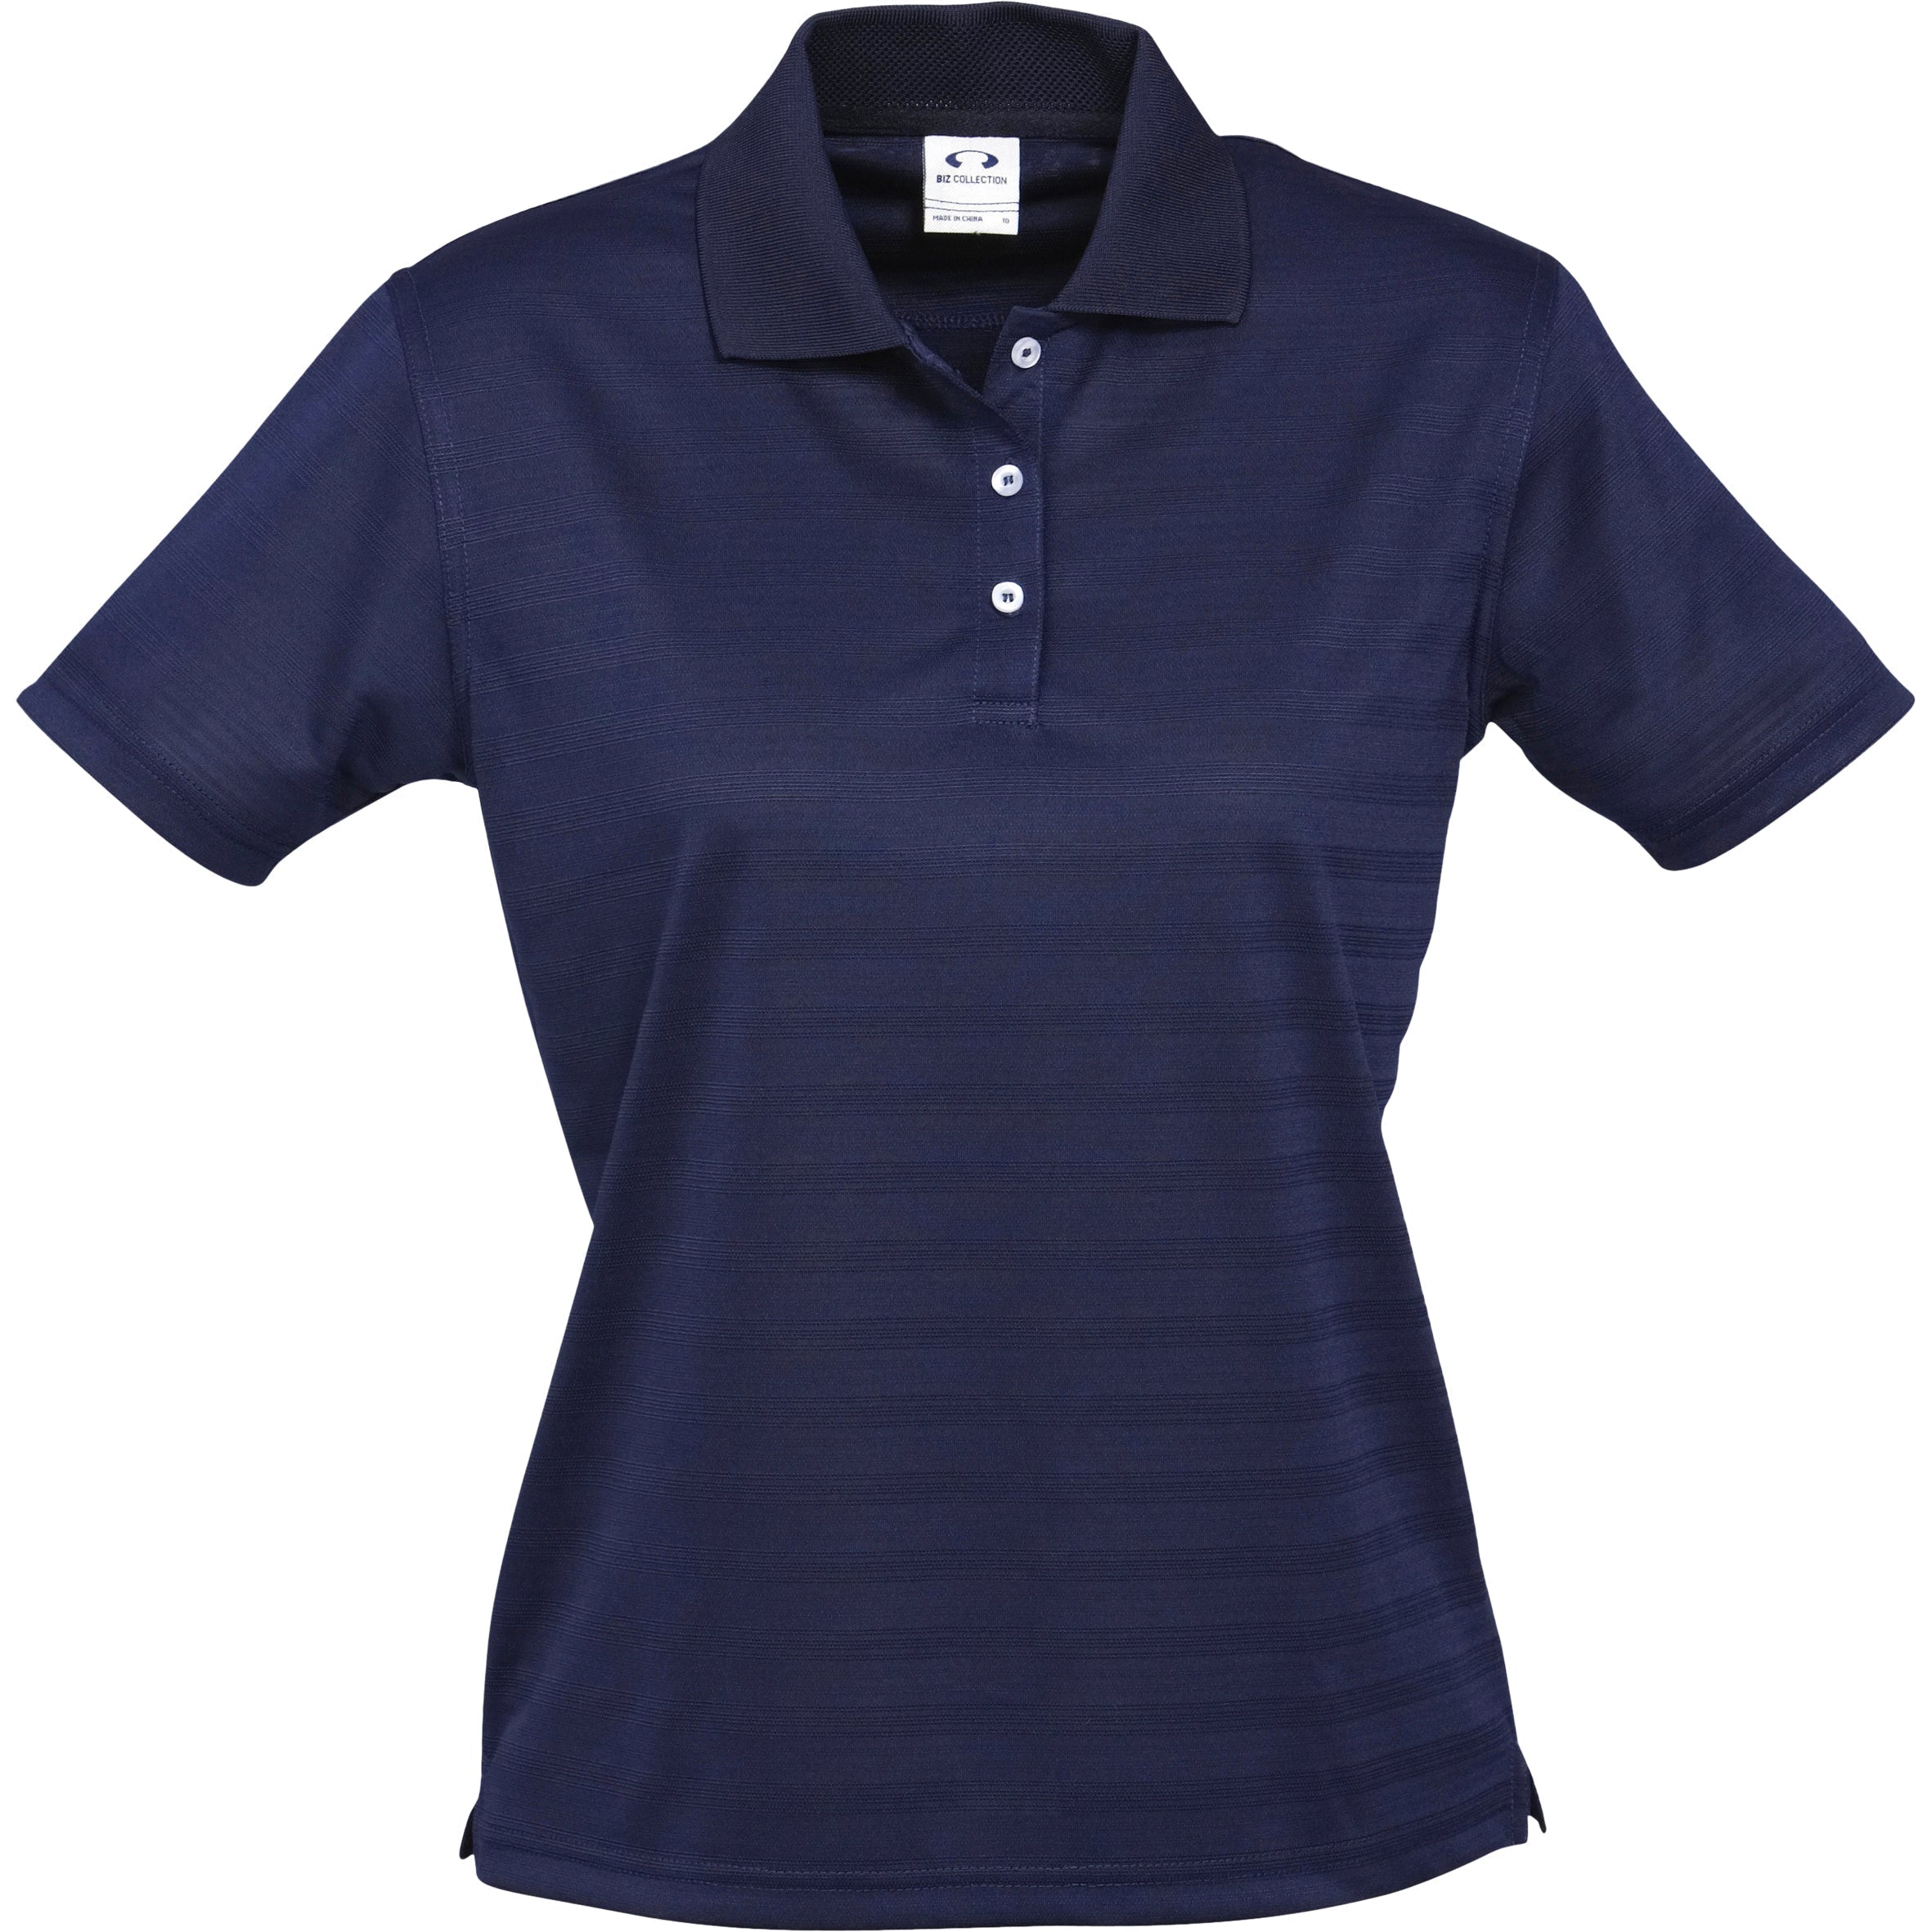 Ladies Icon Golf Shirt - Lime Only-L-Navy-N